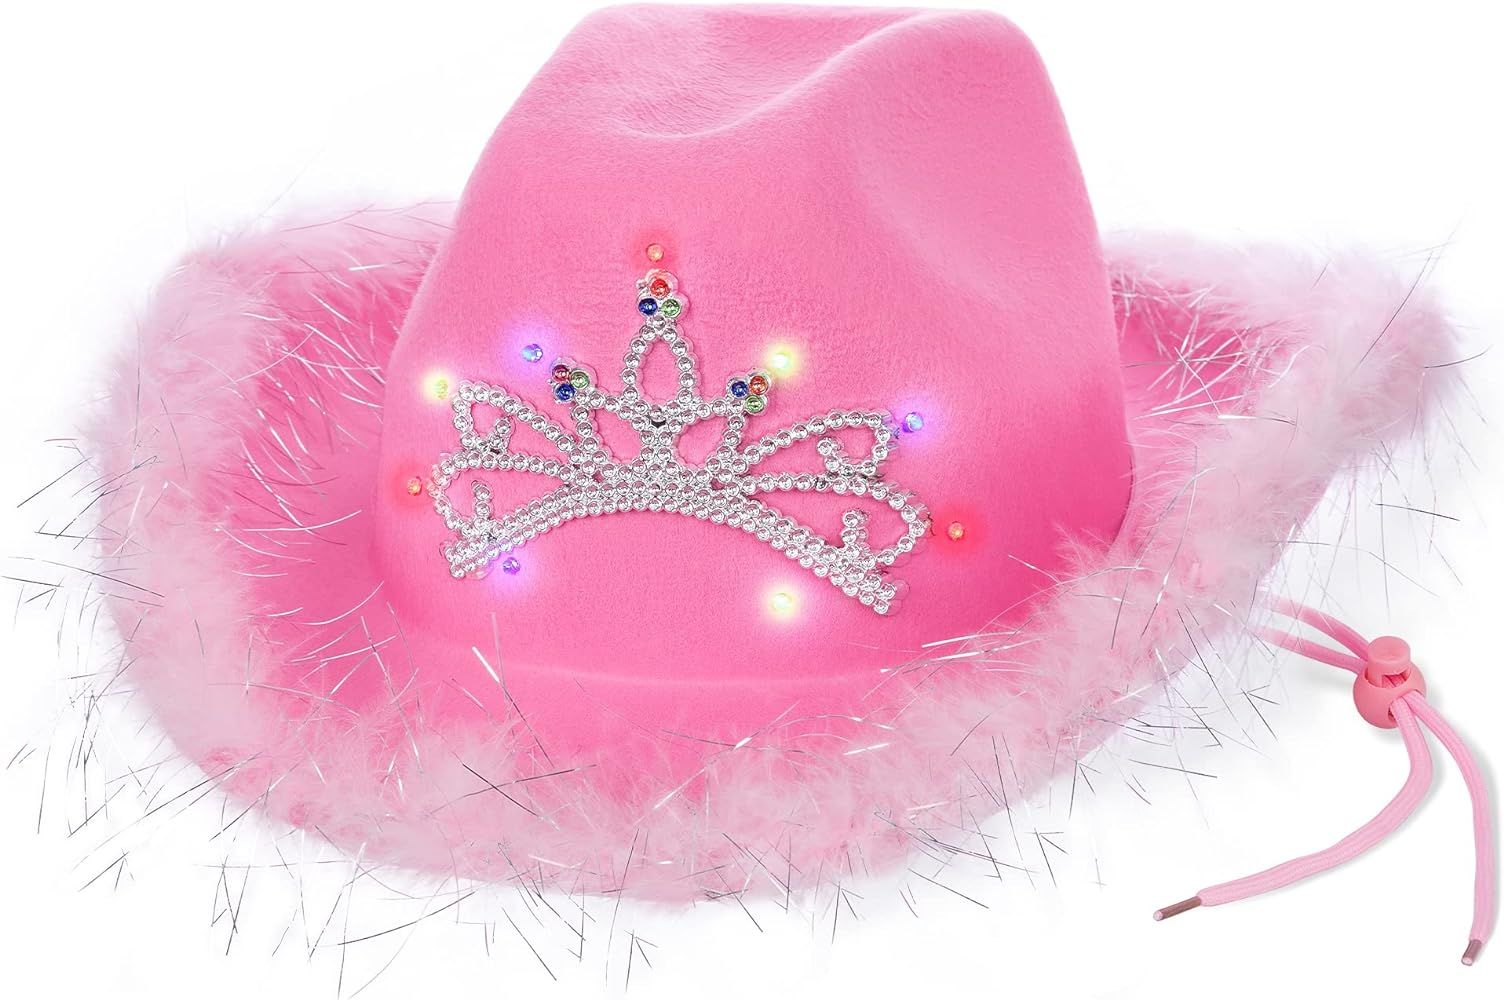 Jasmine Cowboy Hats for Women Boa Fur Light Up with Tiara Party Costume Cowgirl Hat | Amazon (US)